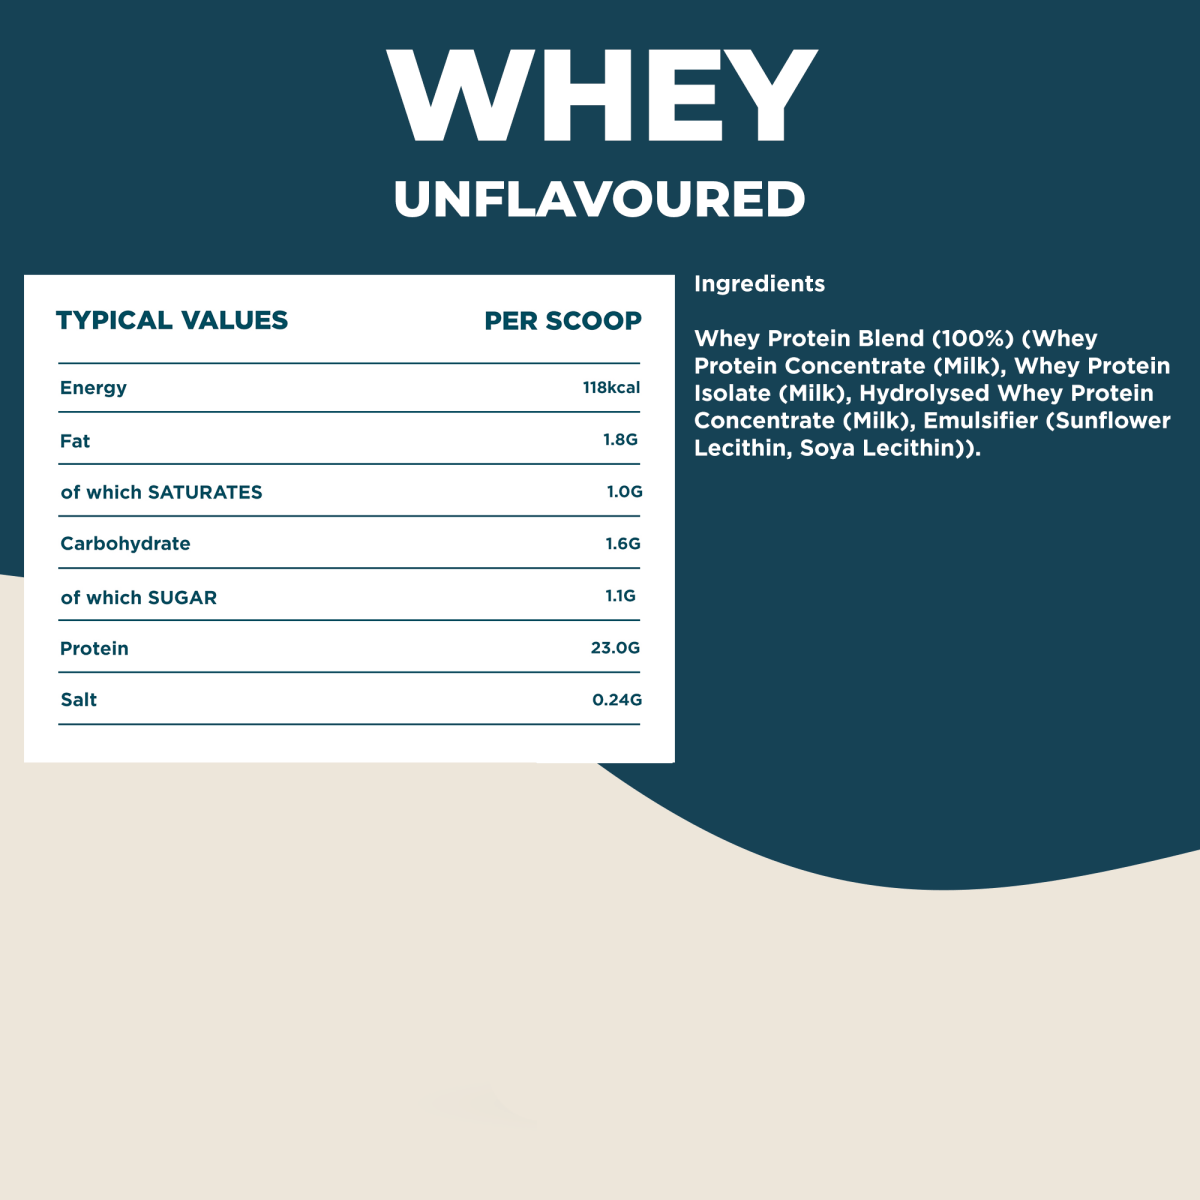 Whey Protein Unflavoured 1kg - #kinetica-sports#